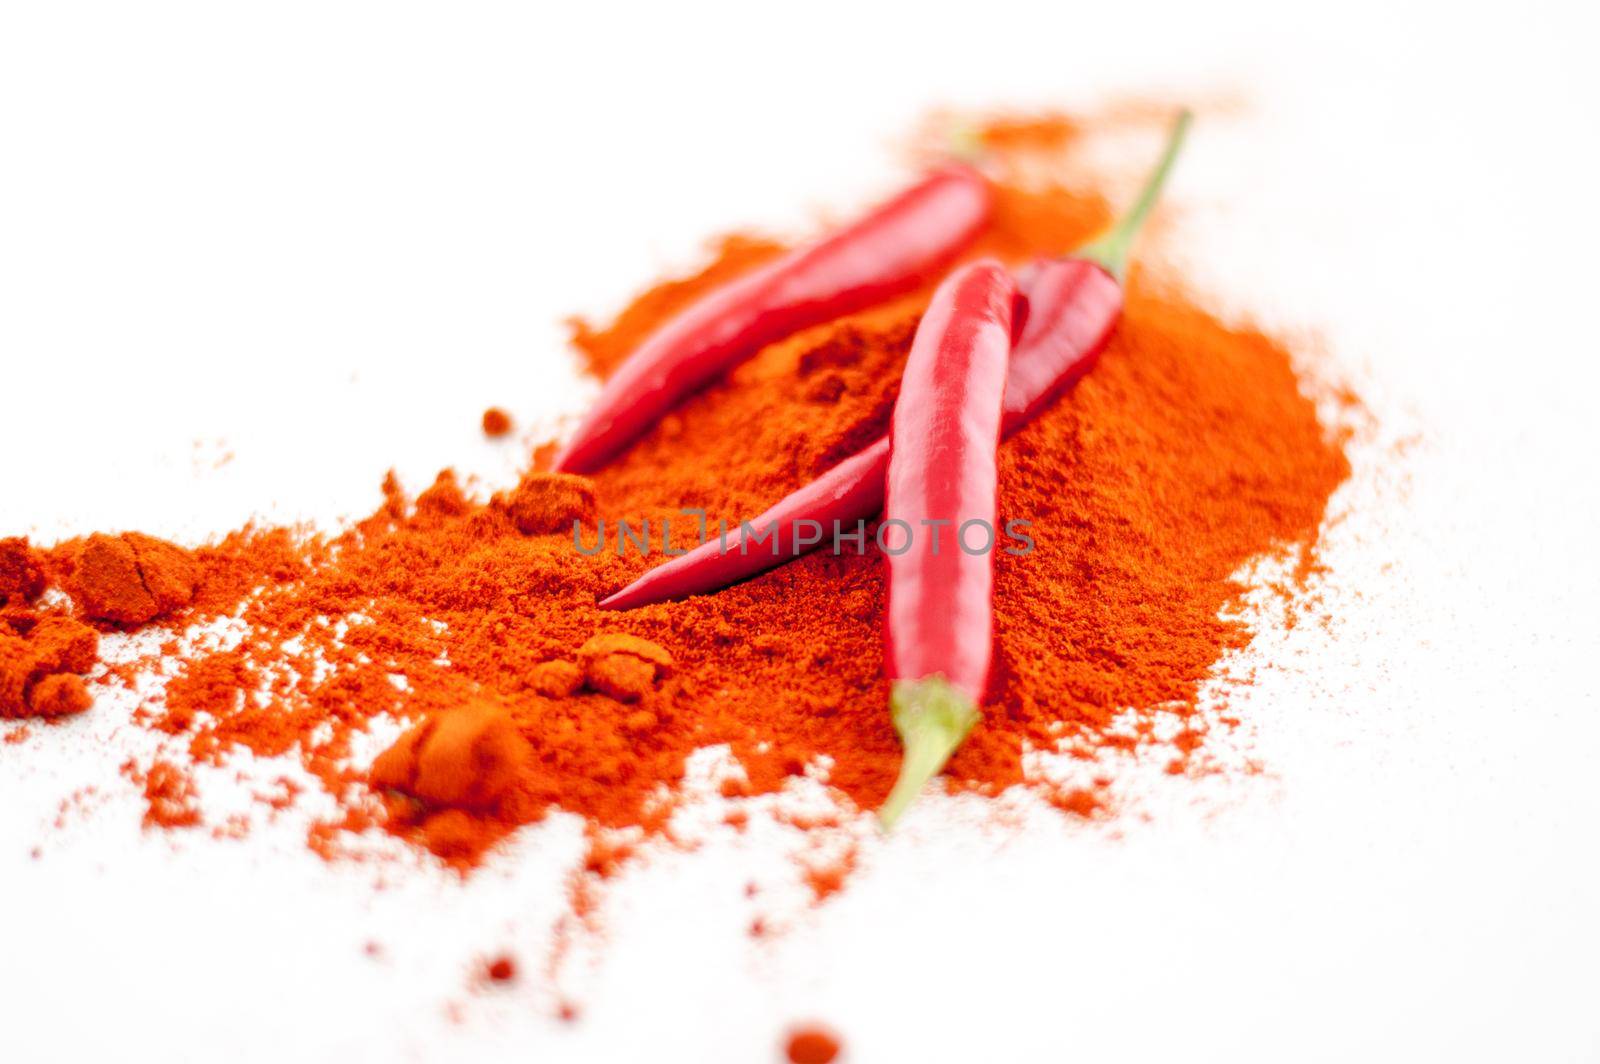 fresh red hot pepper and powder on a white background. High quality photo